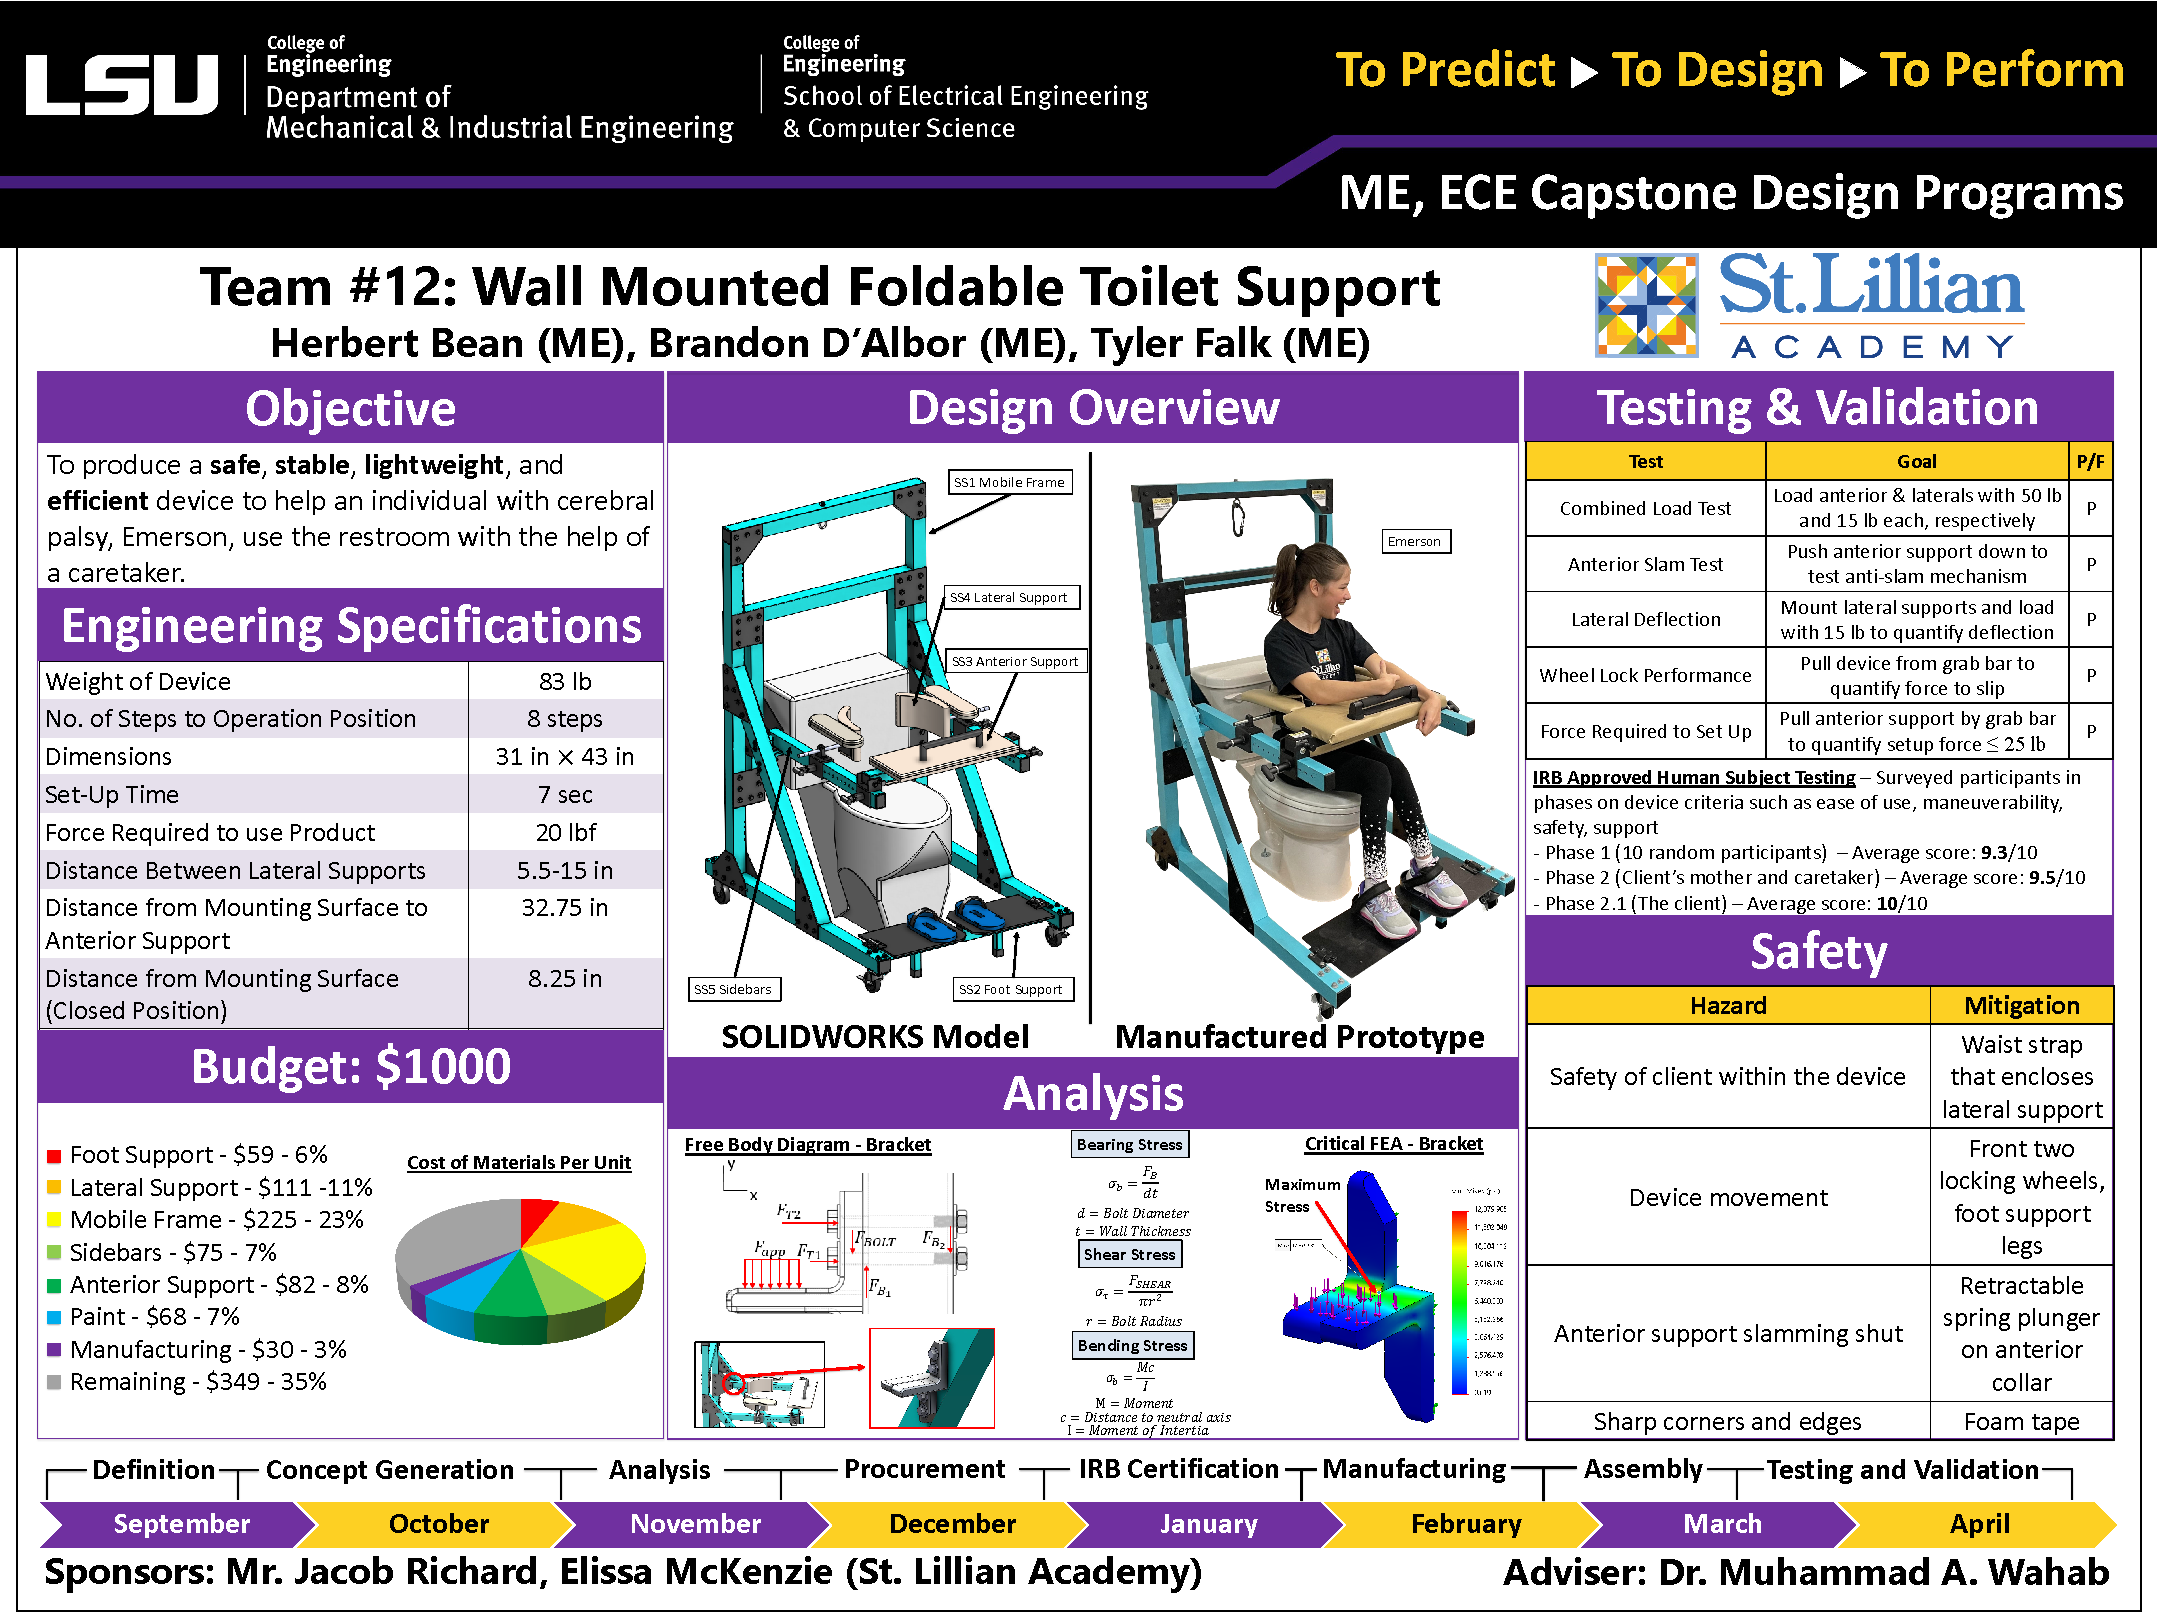 Project 12: Wall mounted foldable toilet support (2021)